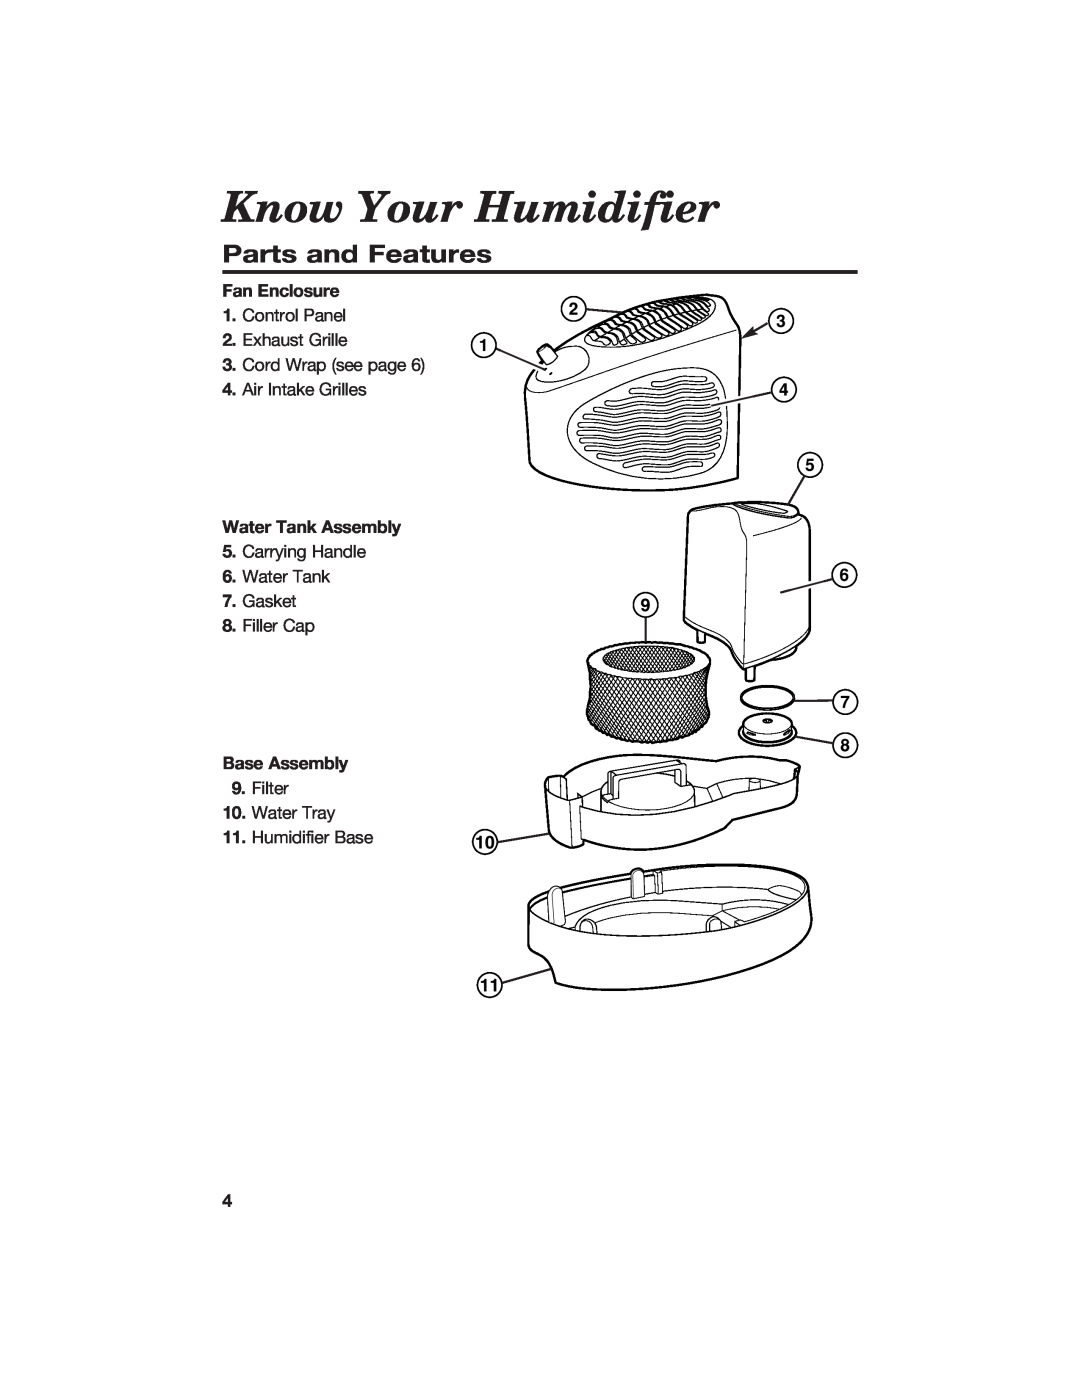 Hamilton Beach 840074800 manual Know Your Humidifier, Parts and Features, Fan Enclosure, Water Tank Assembly, Base Assembly 